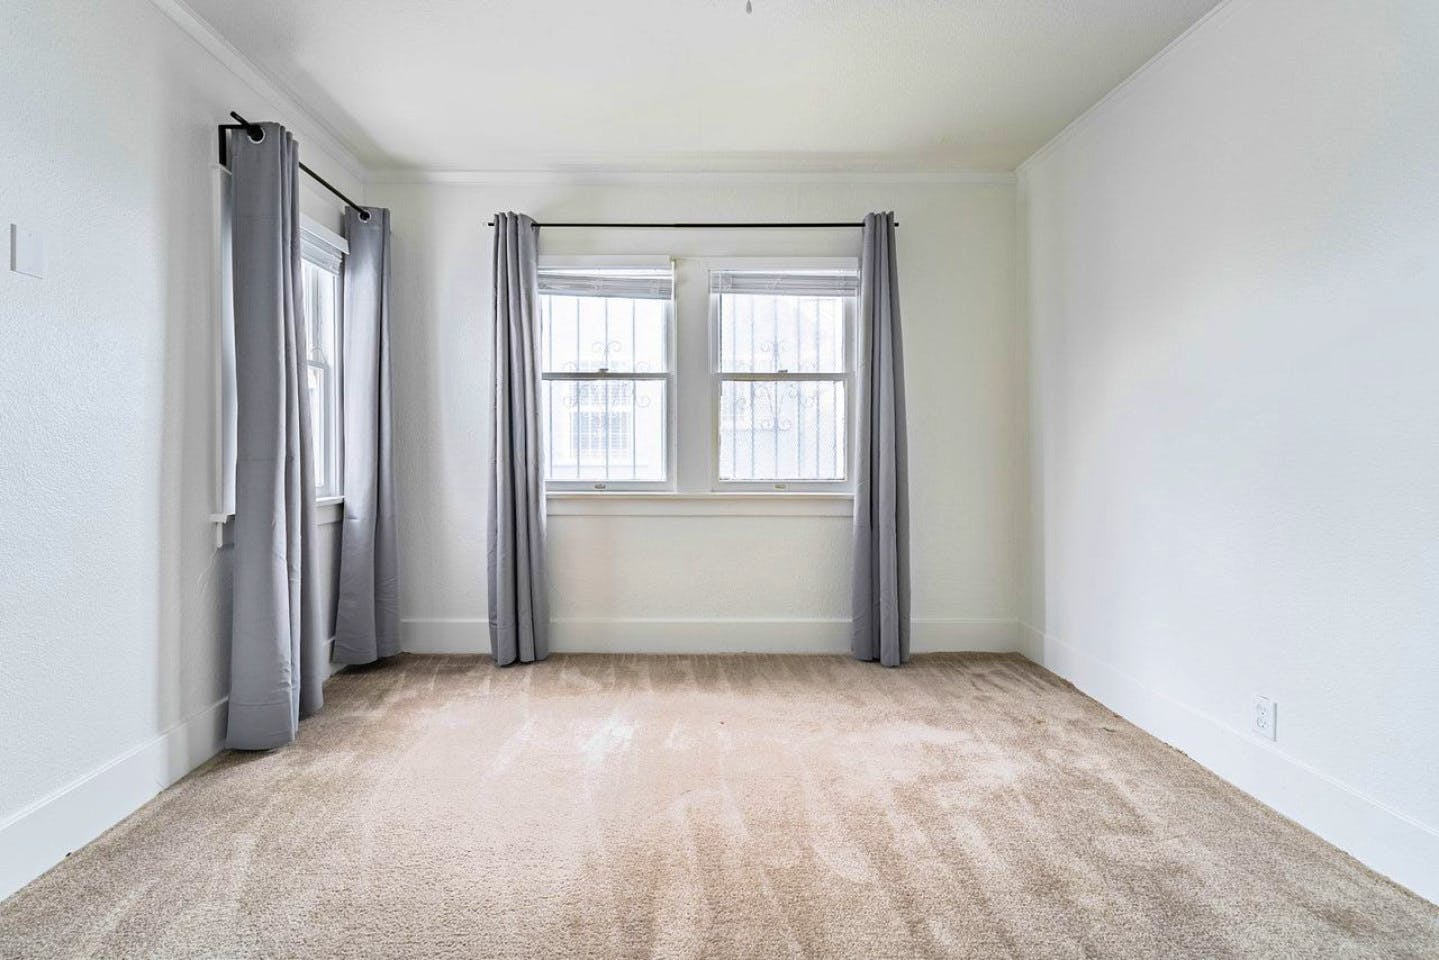 Bright Comfortable Apt. 1 mile away from Van Ness Recreation Center